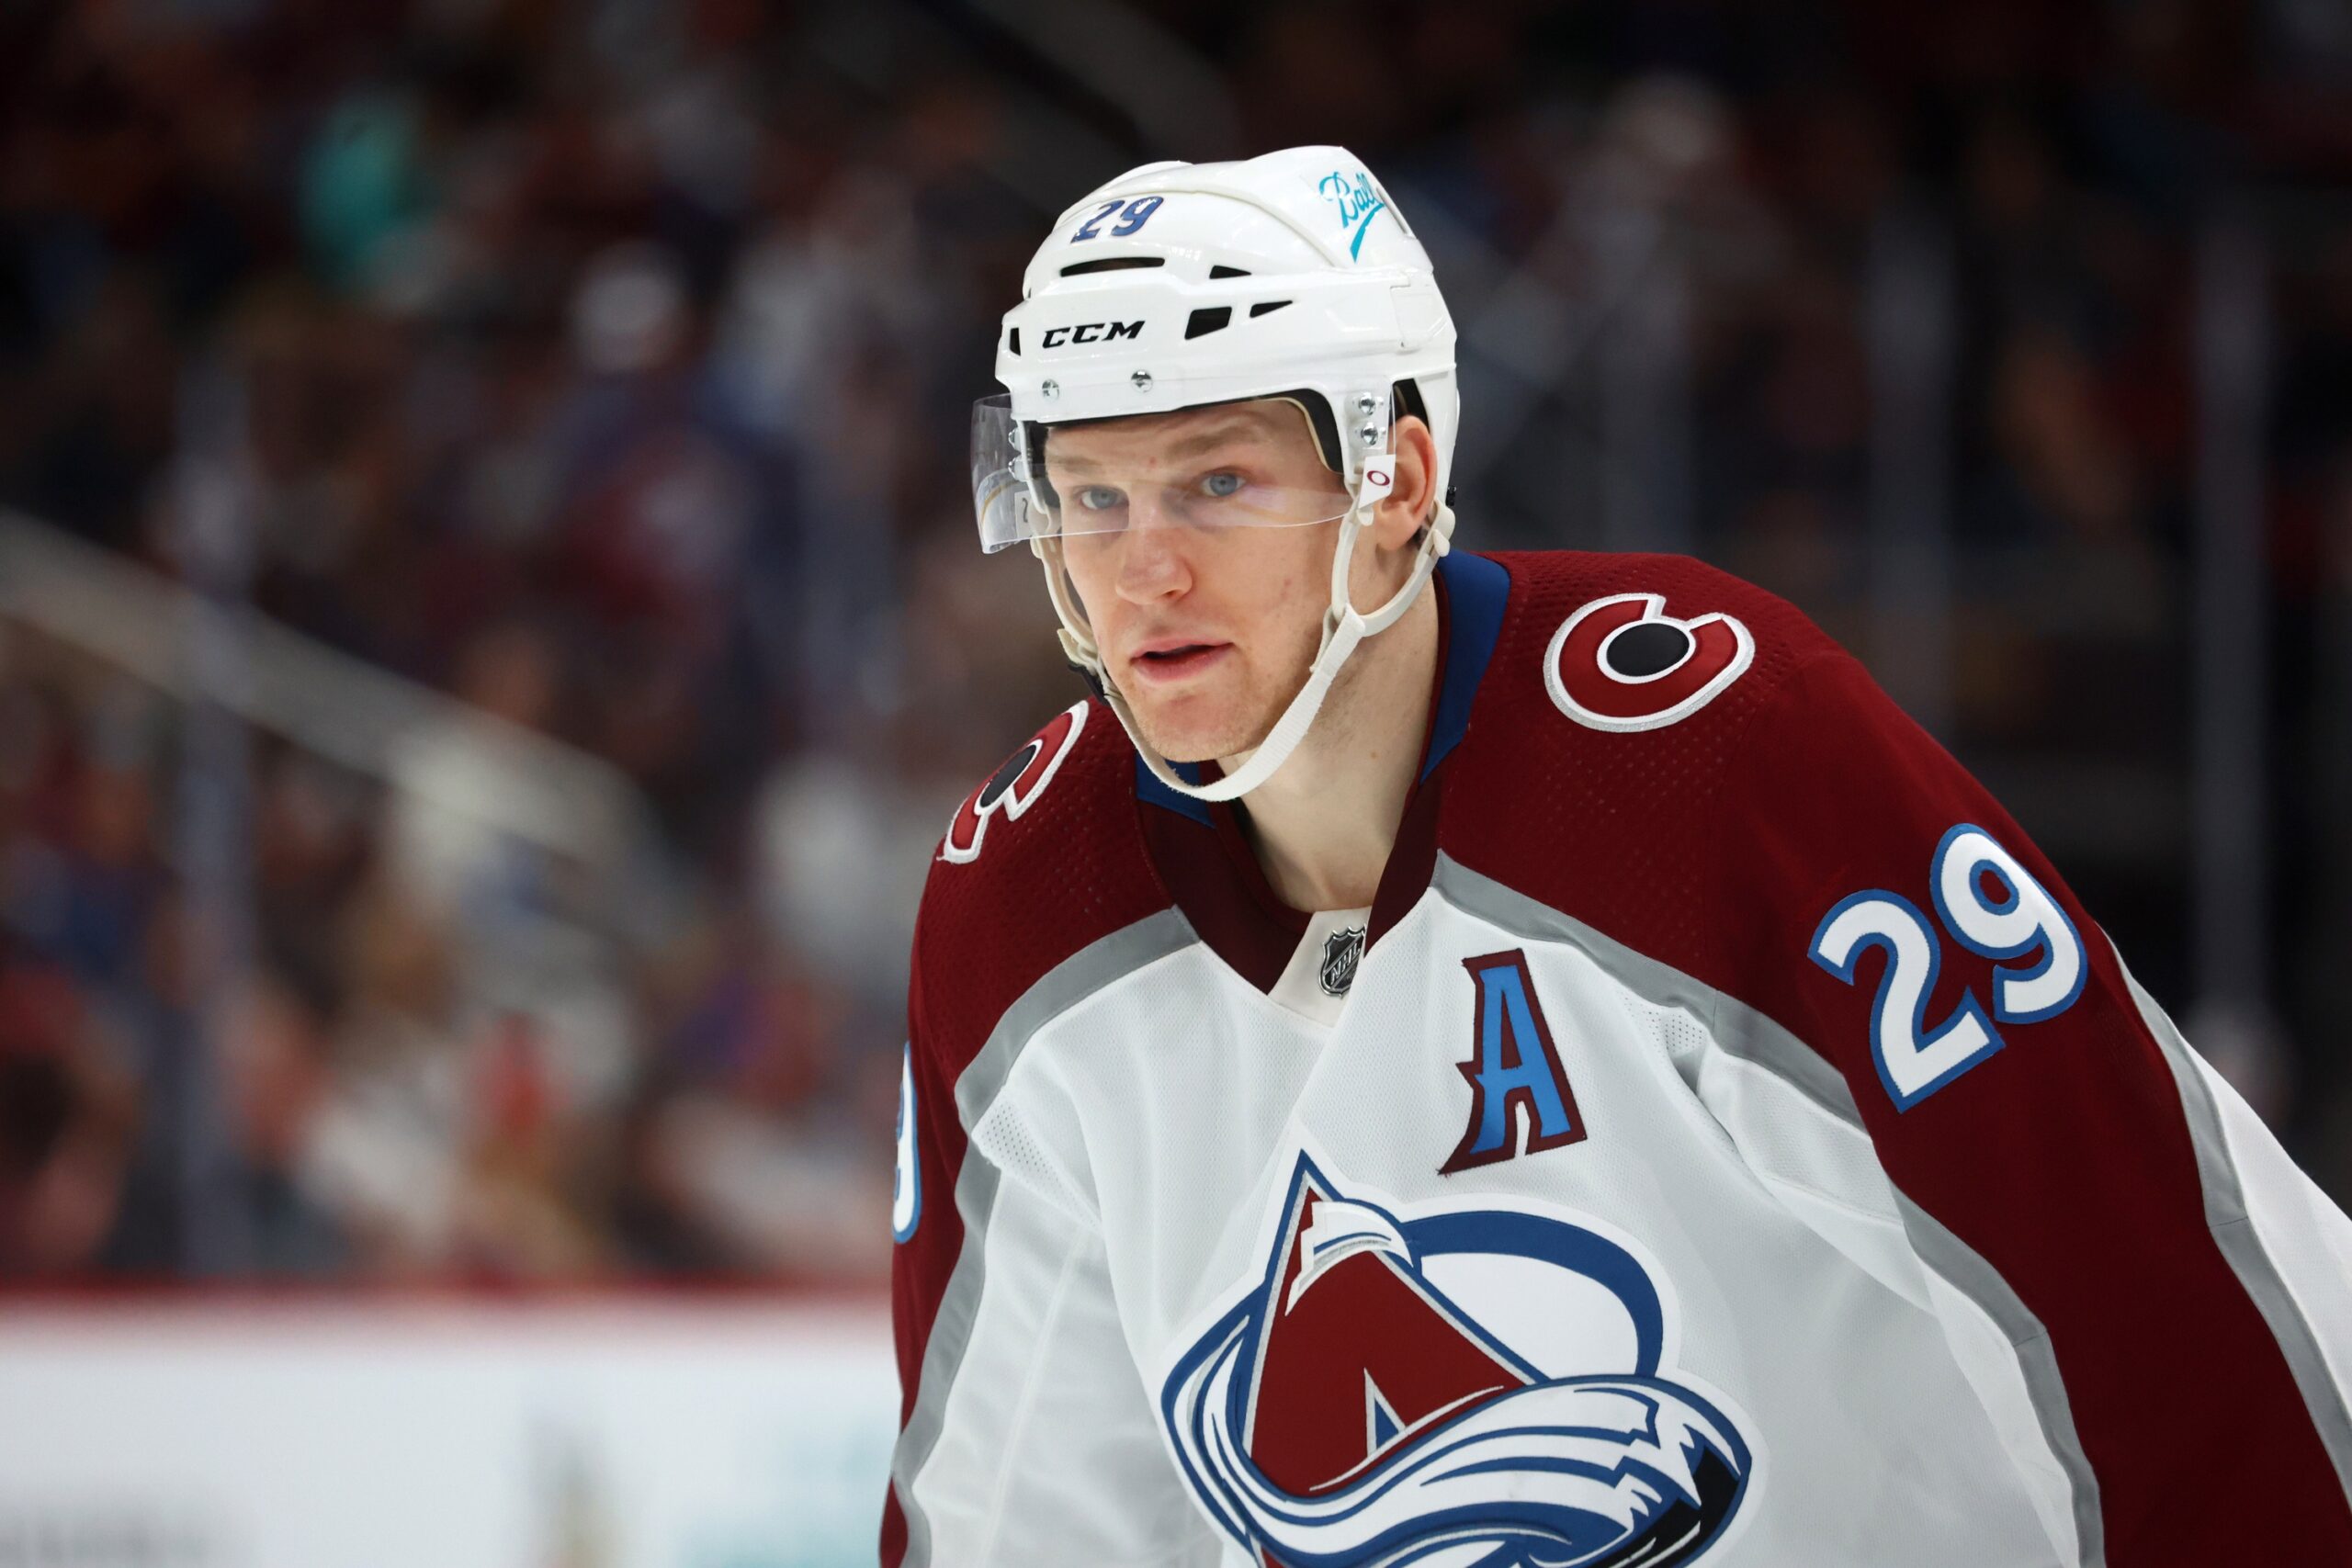 Avalanche forward Nathan MacKinnon injured by nasty high stick